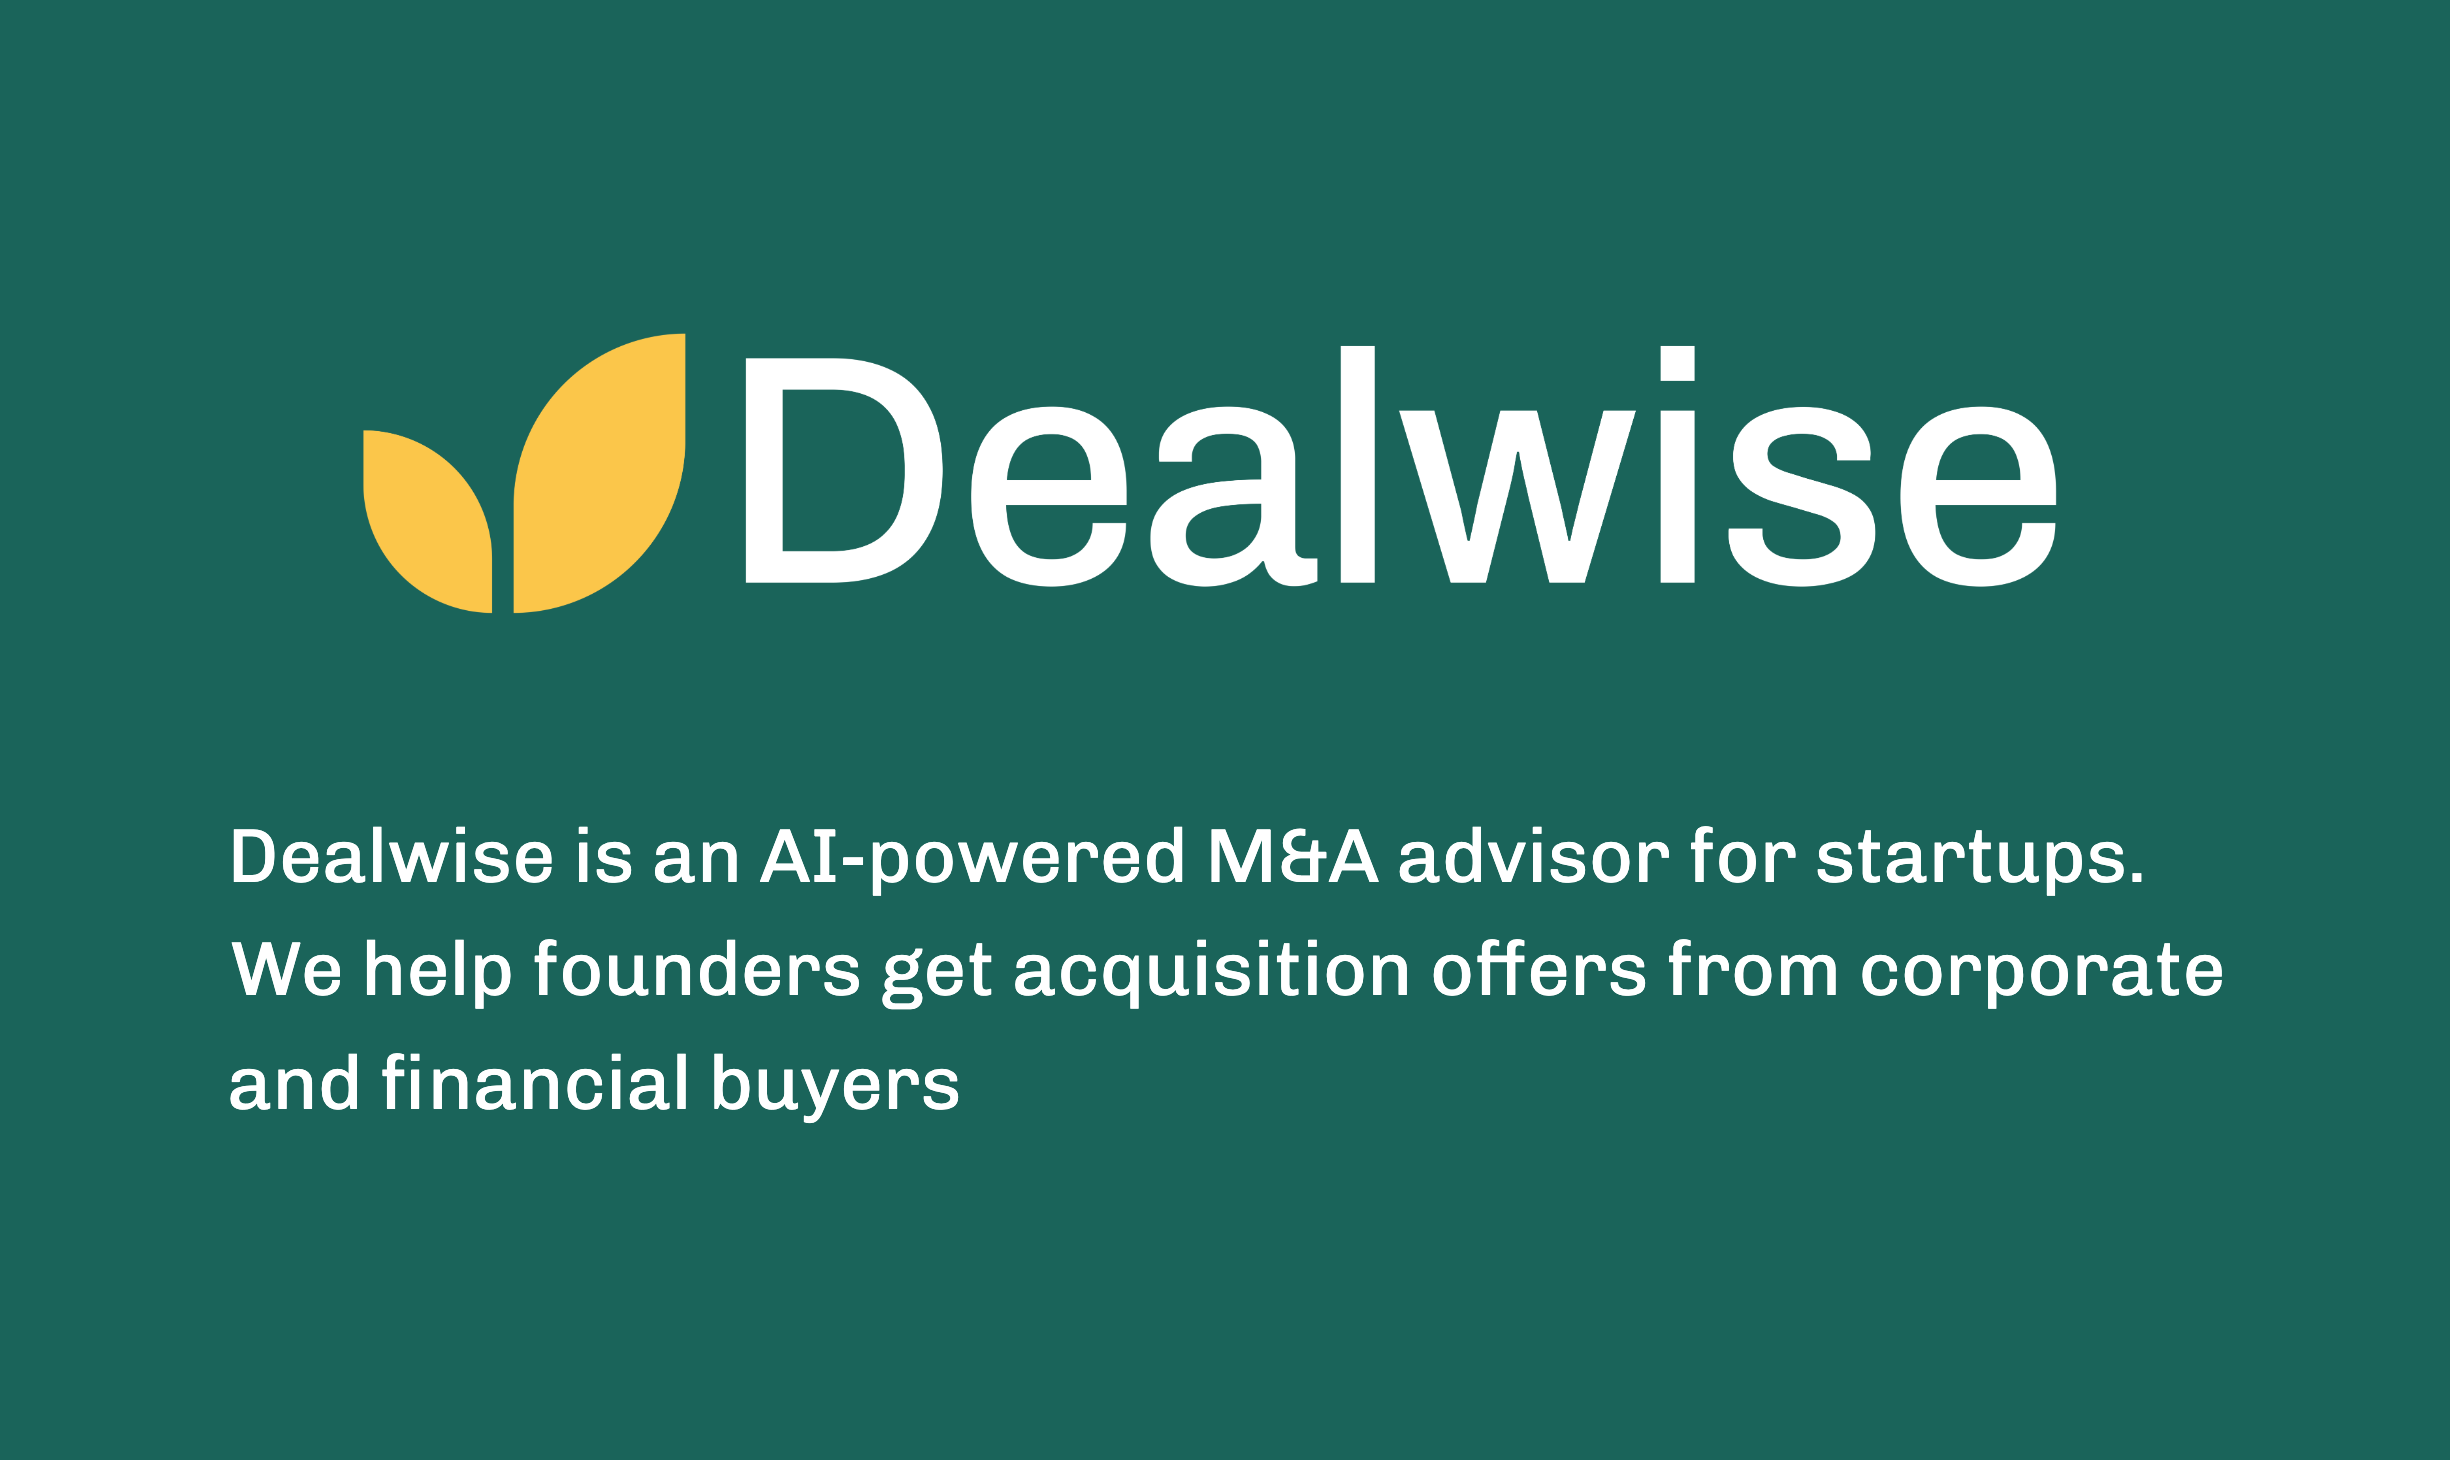 dealwise - AI powered M&A advisor for startups